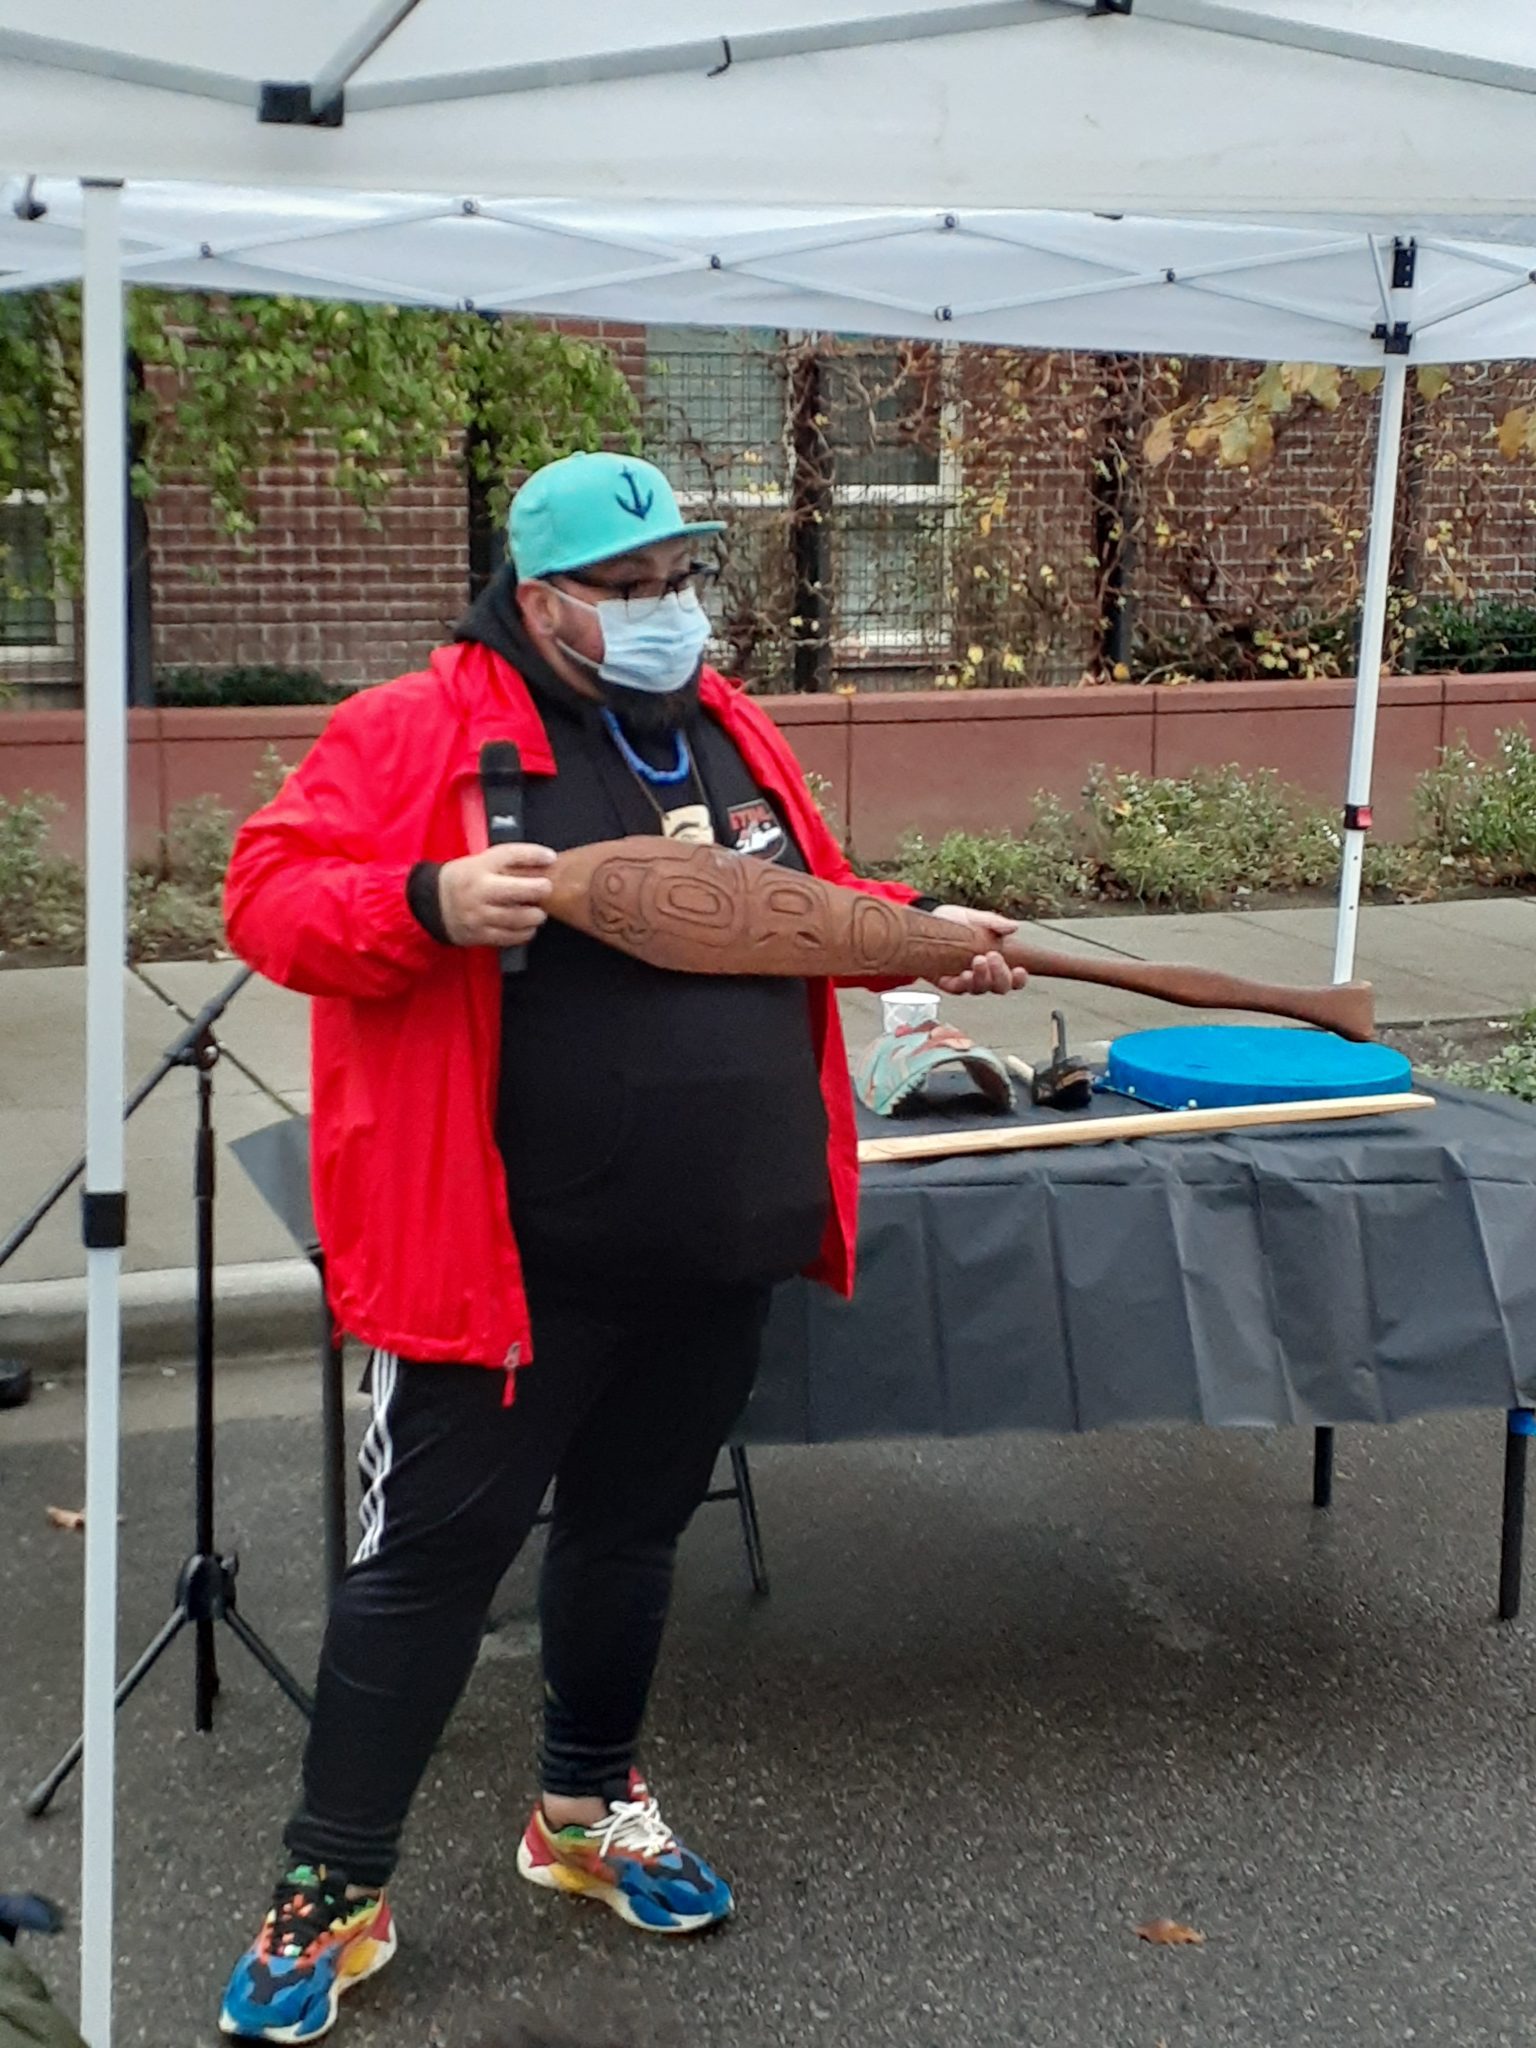 Storyteller Ty Juvinel (Tulalip), shows a traditional paddle that's been in his family for more than 100 years. Ty is wearing a blue mask and holding a microphone while he shares about the paddle. A table and canopy tent are visible in the background behind him.